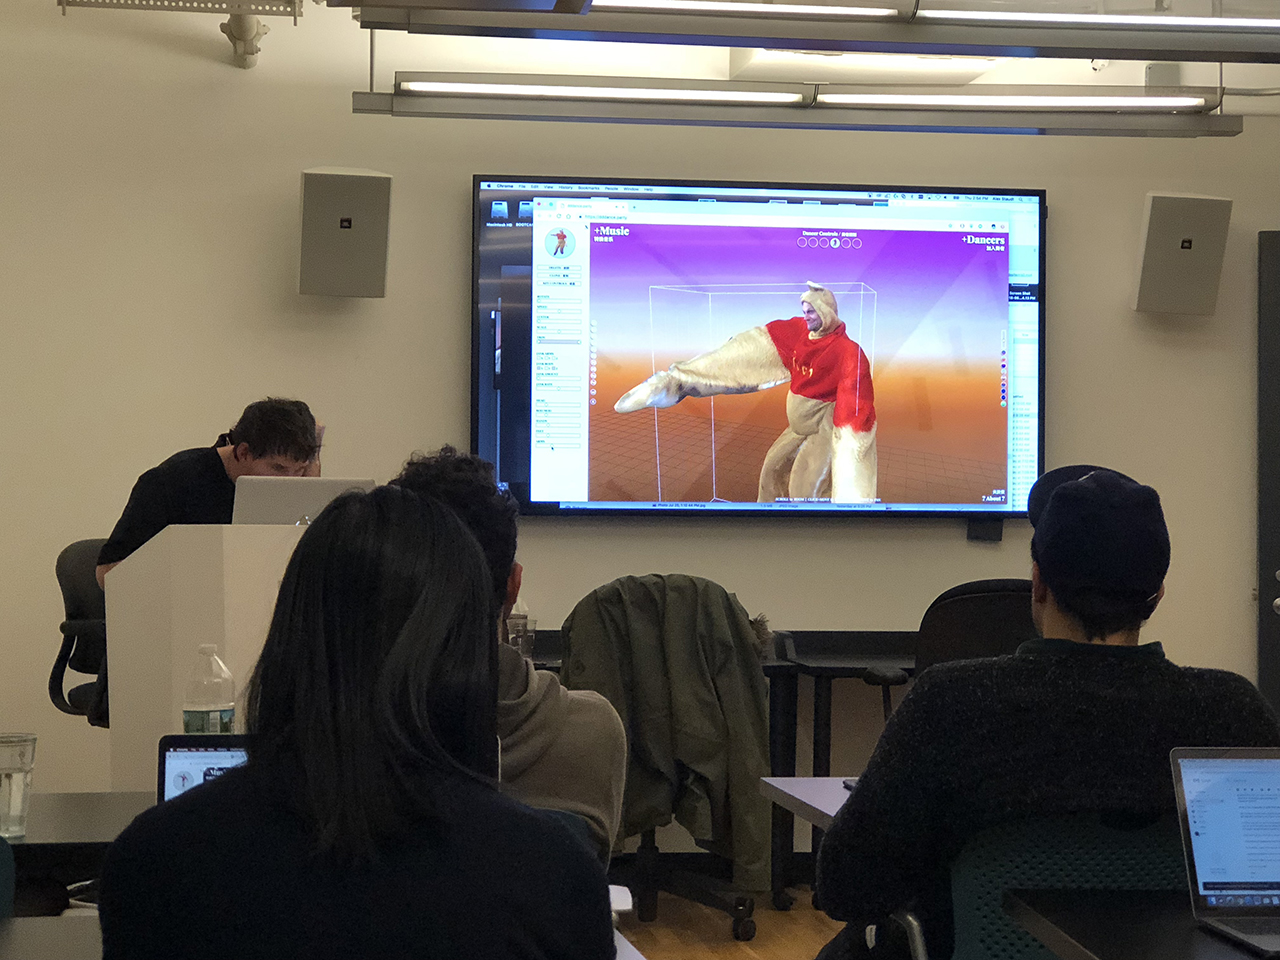 A photo of some students in a classroom, listening to a lecture presented by a man, while watching a tv screen. On the screen there is a 3d rendered image of a distorted humanoid figure.